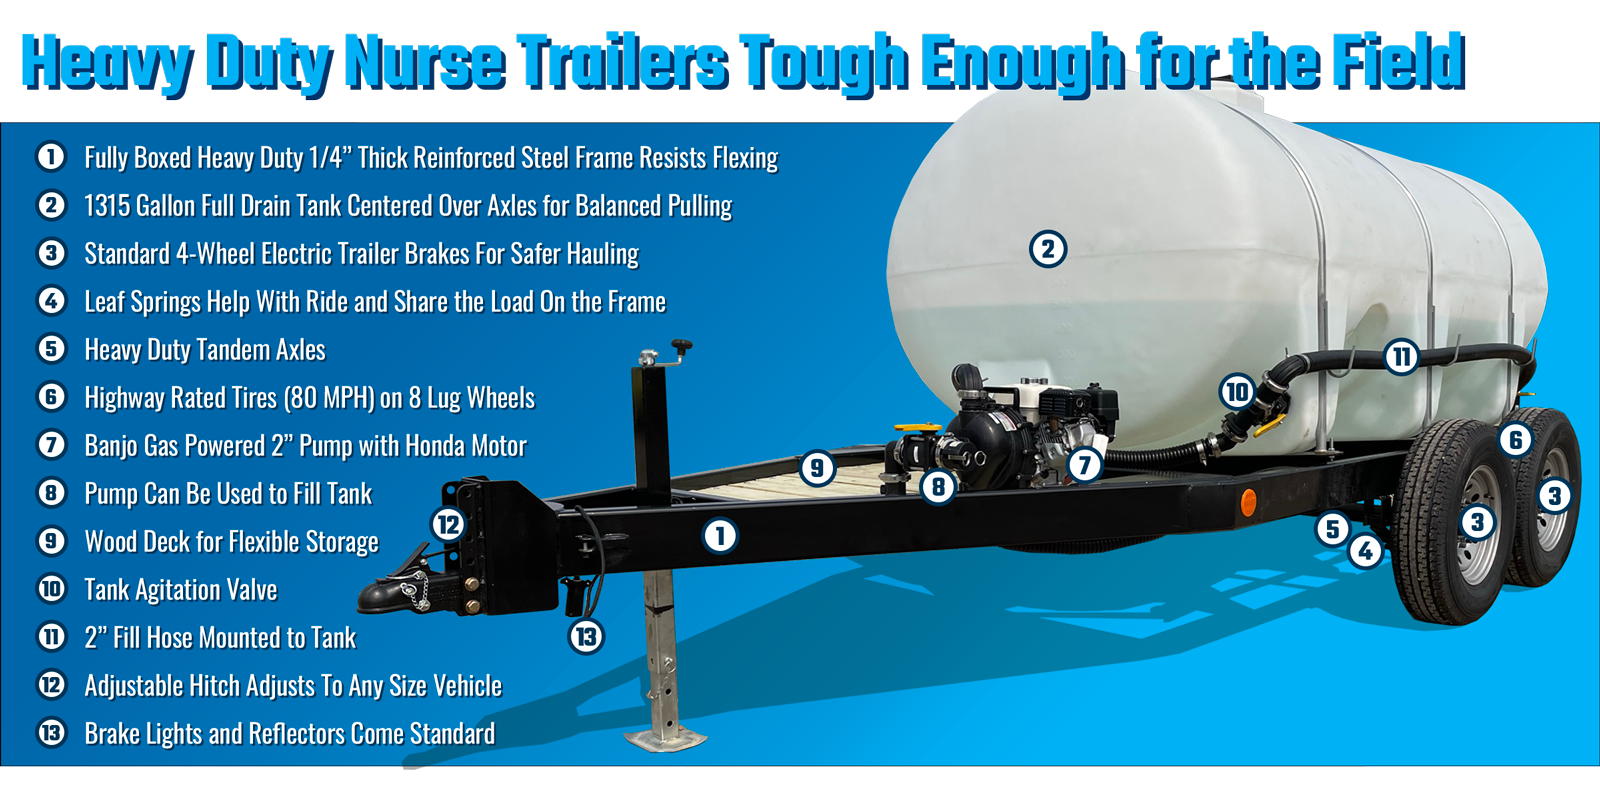 BENCO 1315 gallon full drain Nurse Trailers are built stronger and packed with standard features